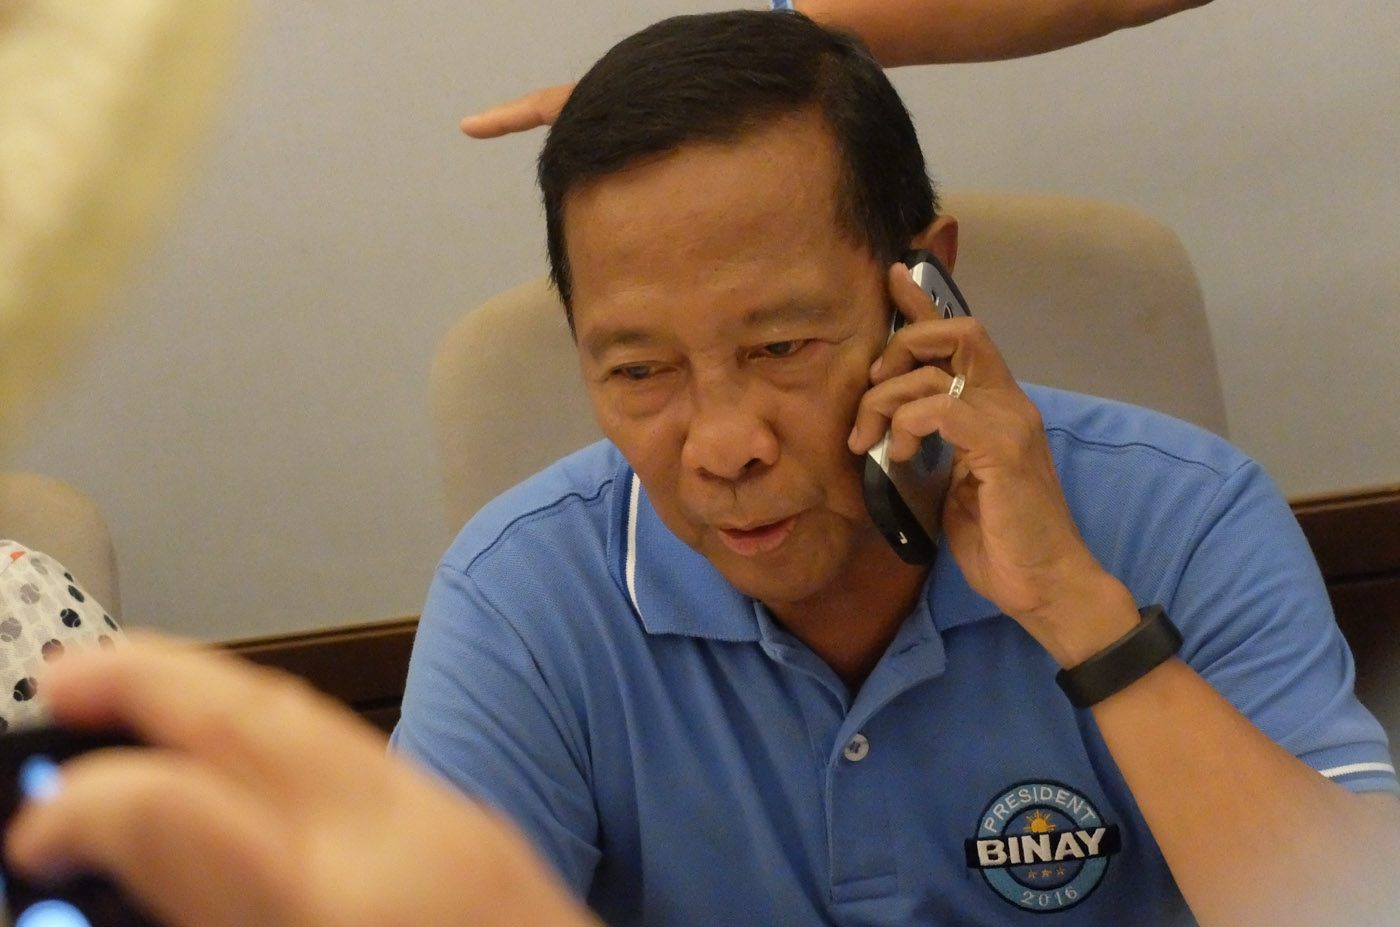 What’s next for VP Binay?